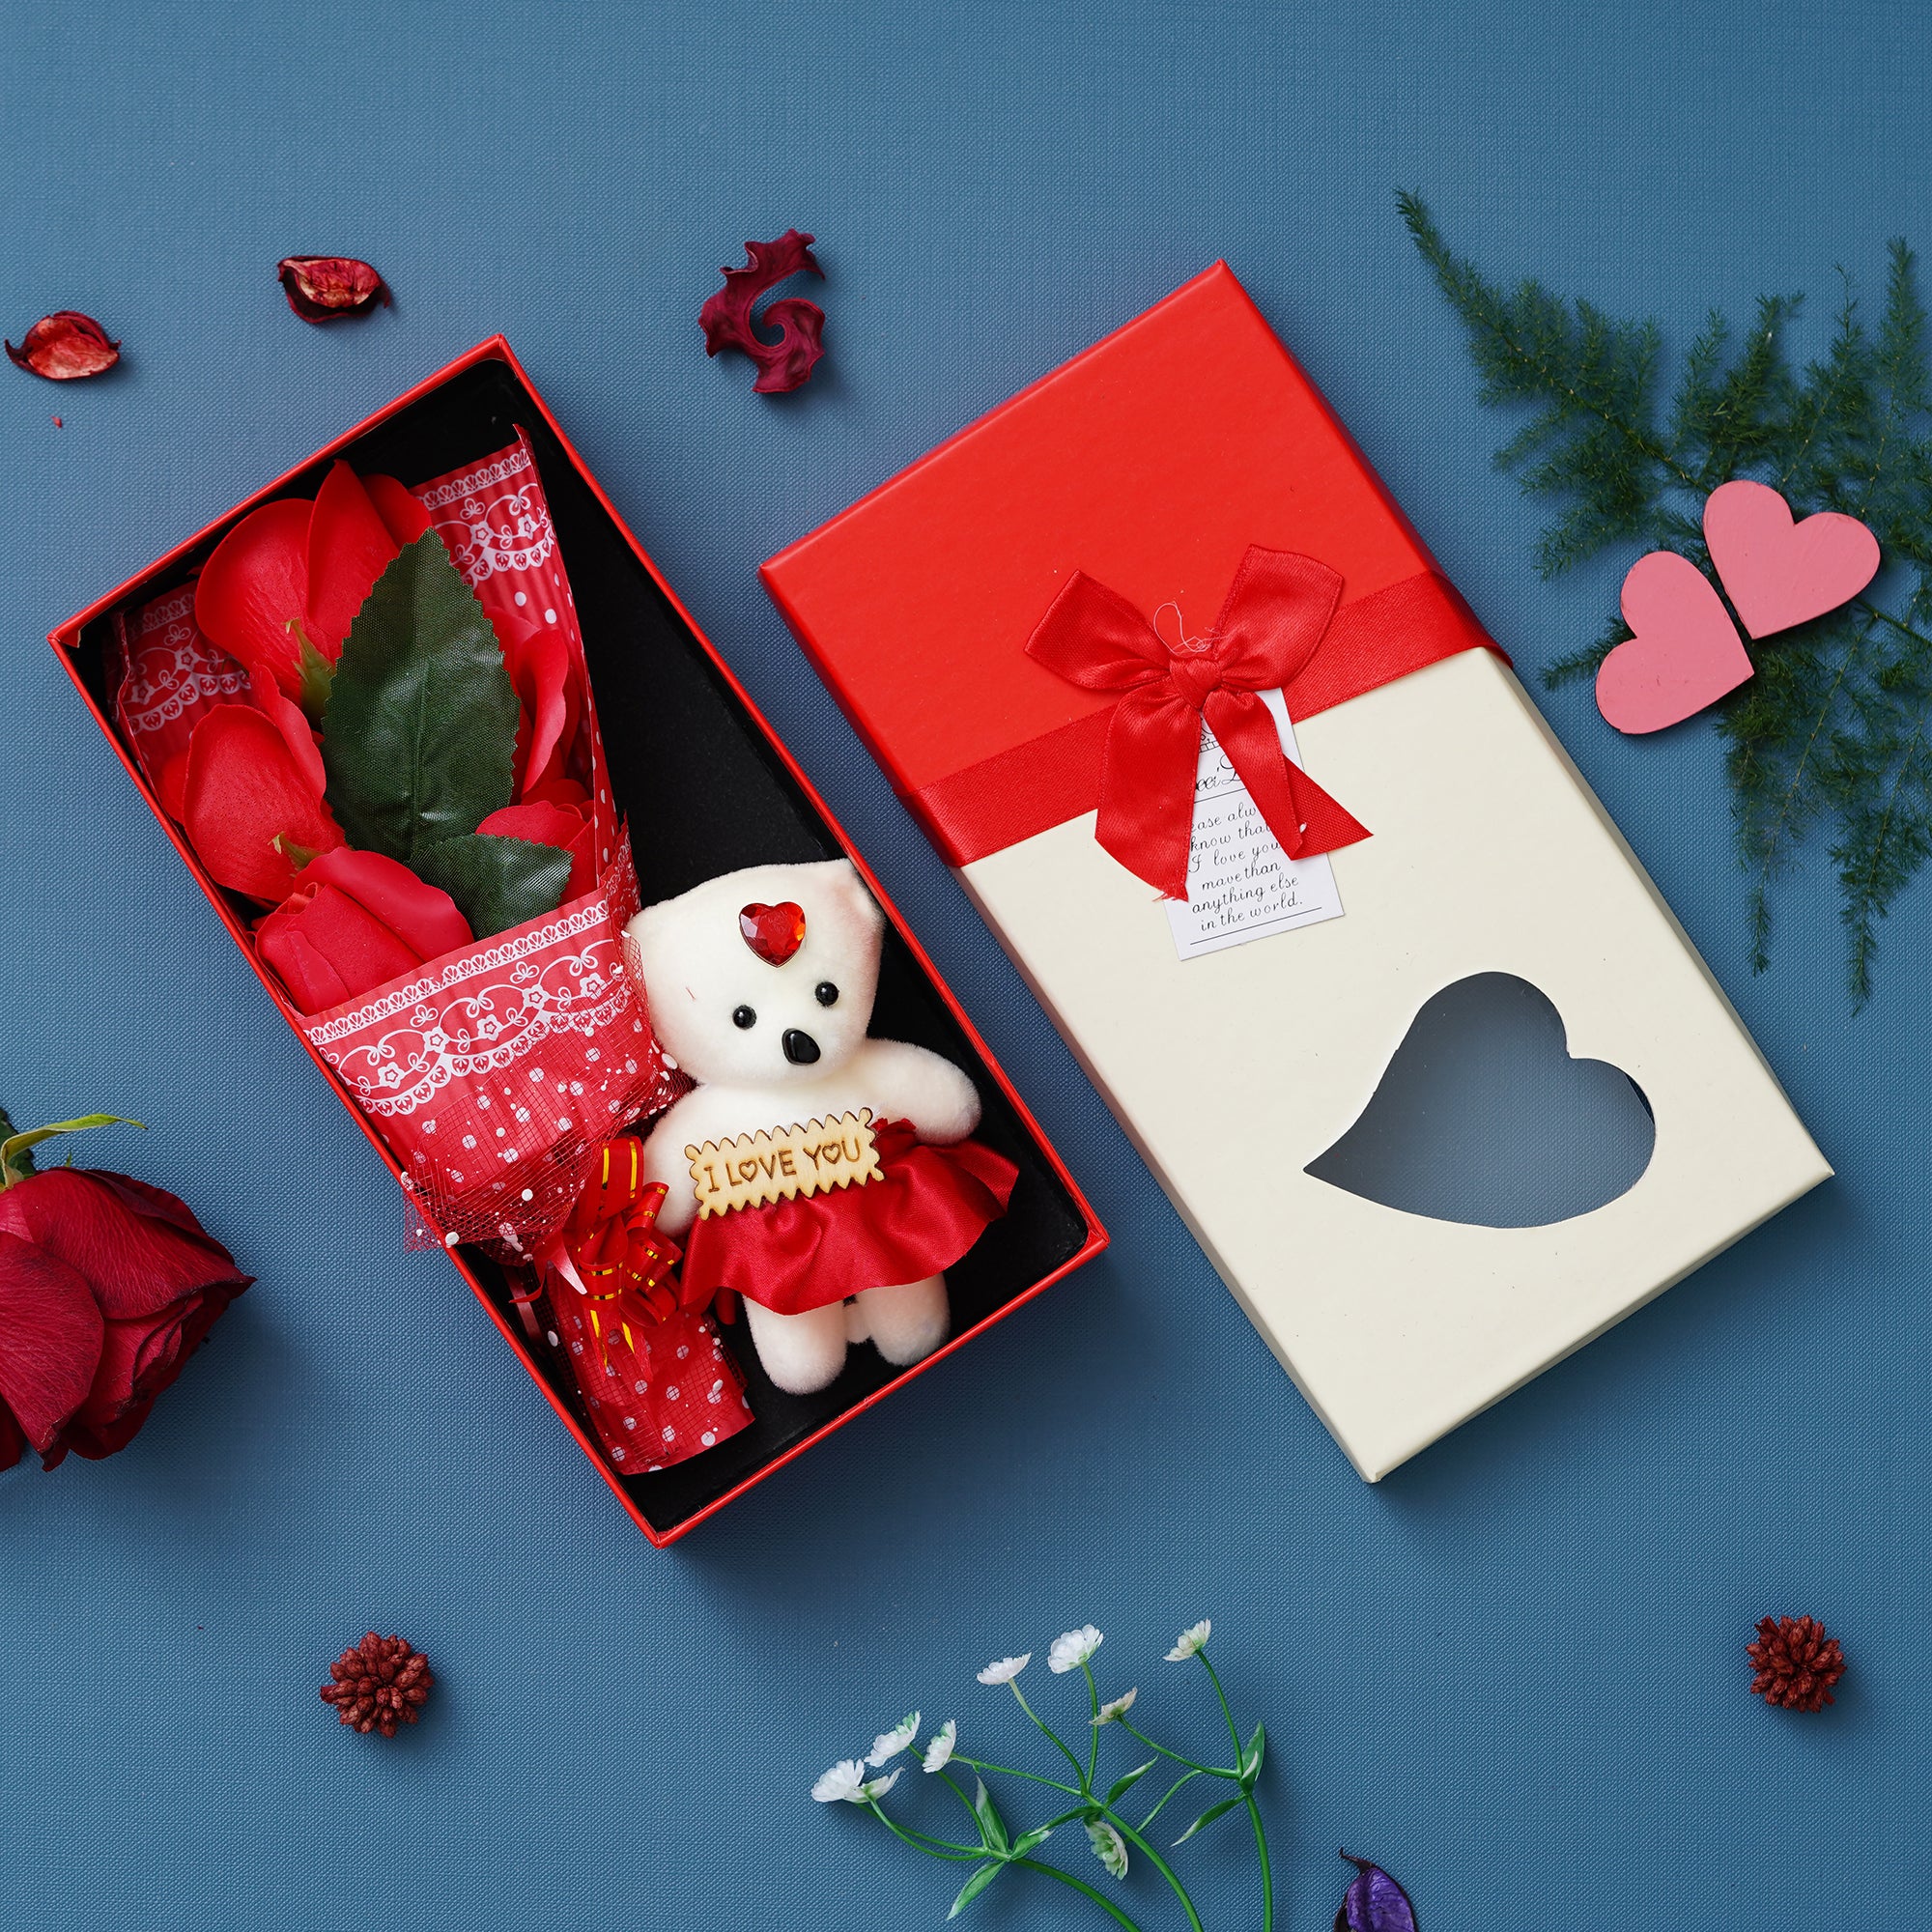 Valentine Combo of Pack of 12 Love Coupons Gift Cards Set, "20 Reasons Why I Love You" Printed on Little Hearts Wooden Gift Set, Red Roses Bouquet and White, Red Teddy Bear Valentine's Rectangle Shaped Gift Box 5